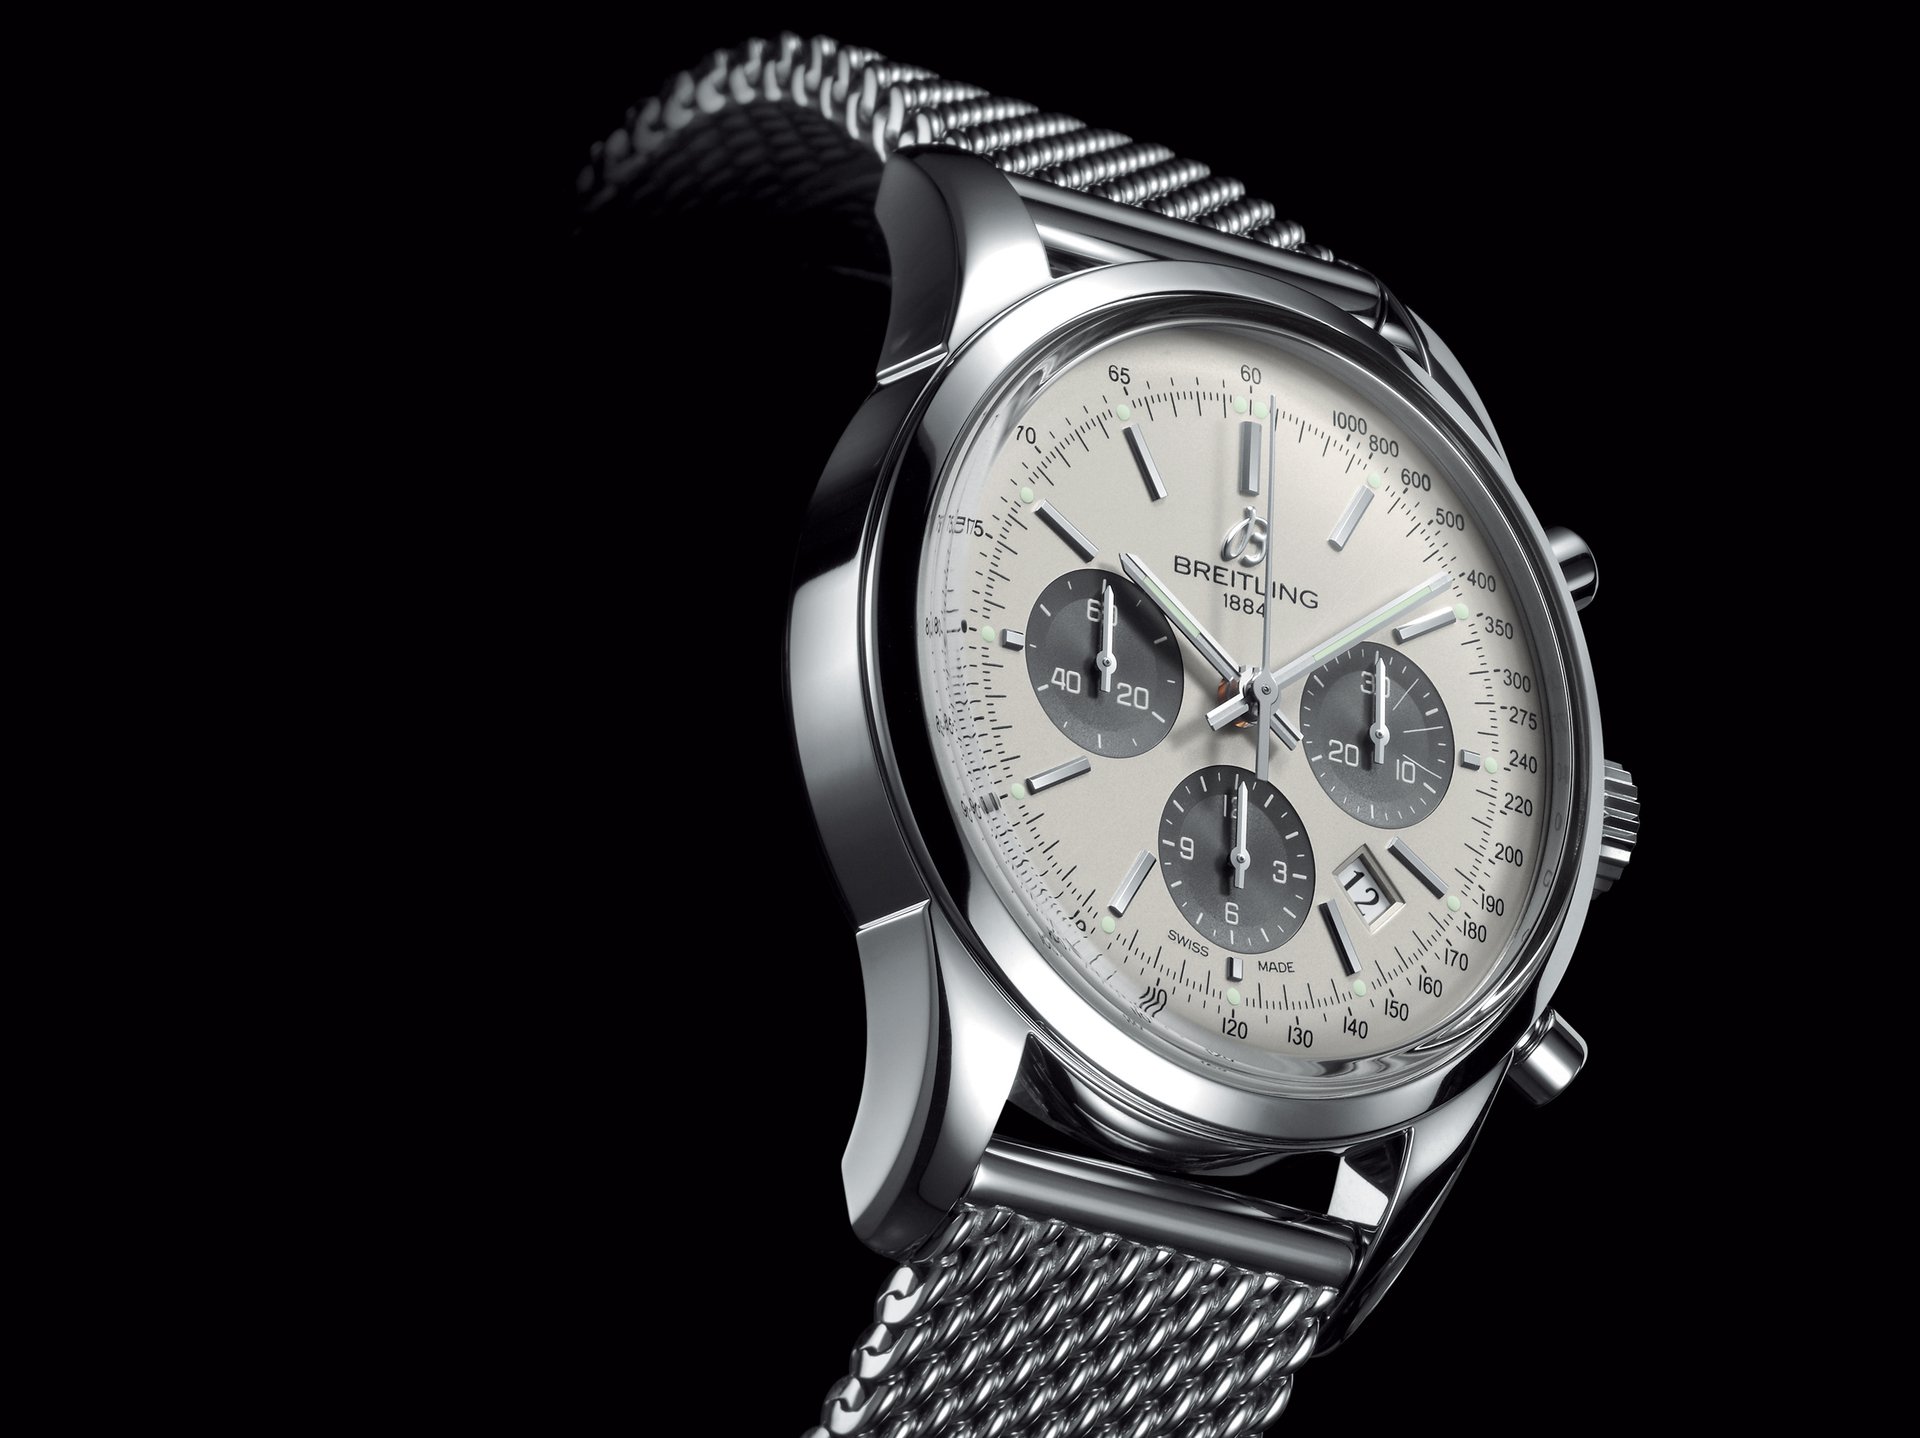 The breitling Crosswind Special A44355, which will provide service documents from 2018